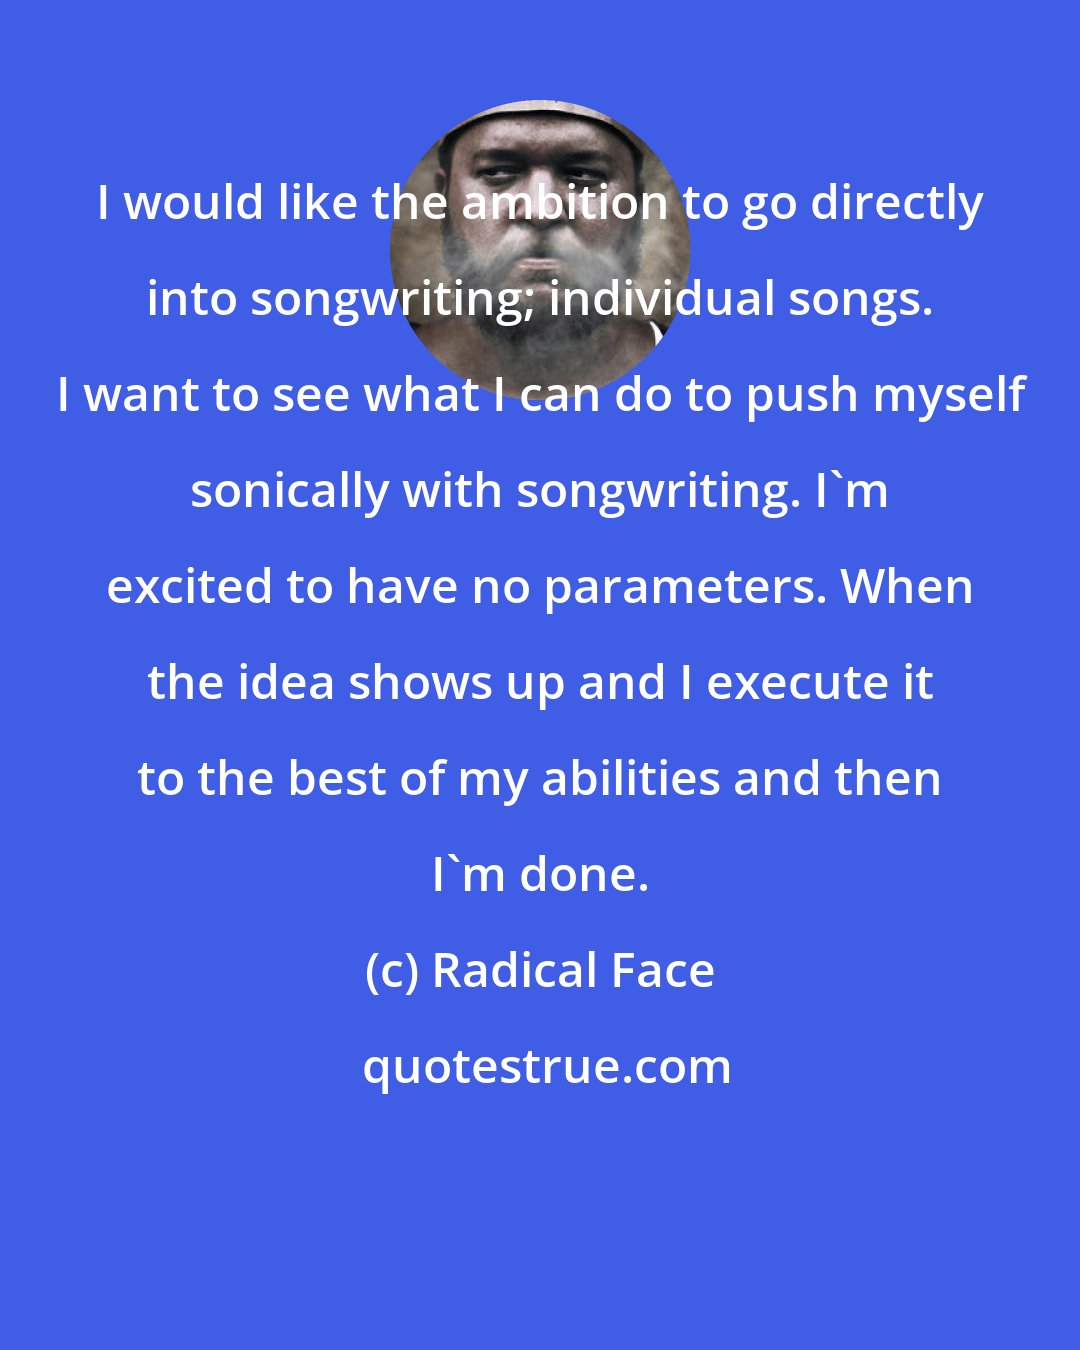 Radical Face: I would like the ambition to go directly into songwriting; individual songs. I want to see what I can do to push myself sonically with songwriting. I'm excited to have no parameters. When the idea shows up and I execute it to the best of my abilities and then I'm done.